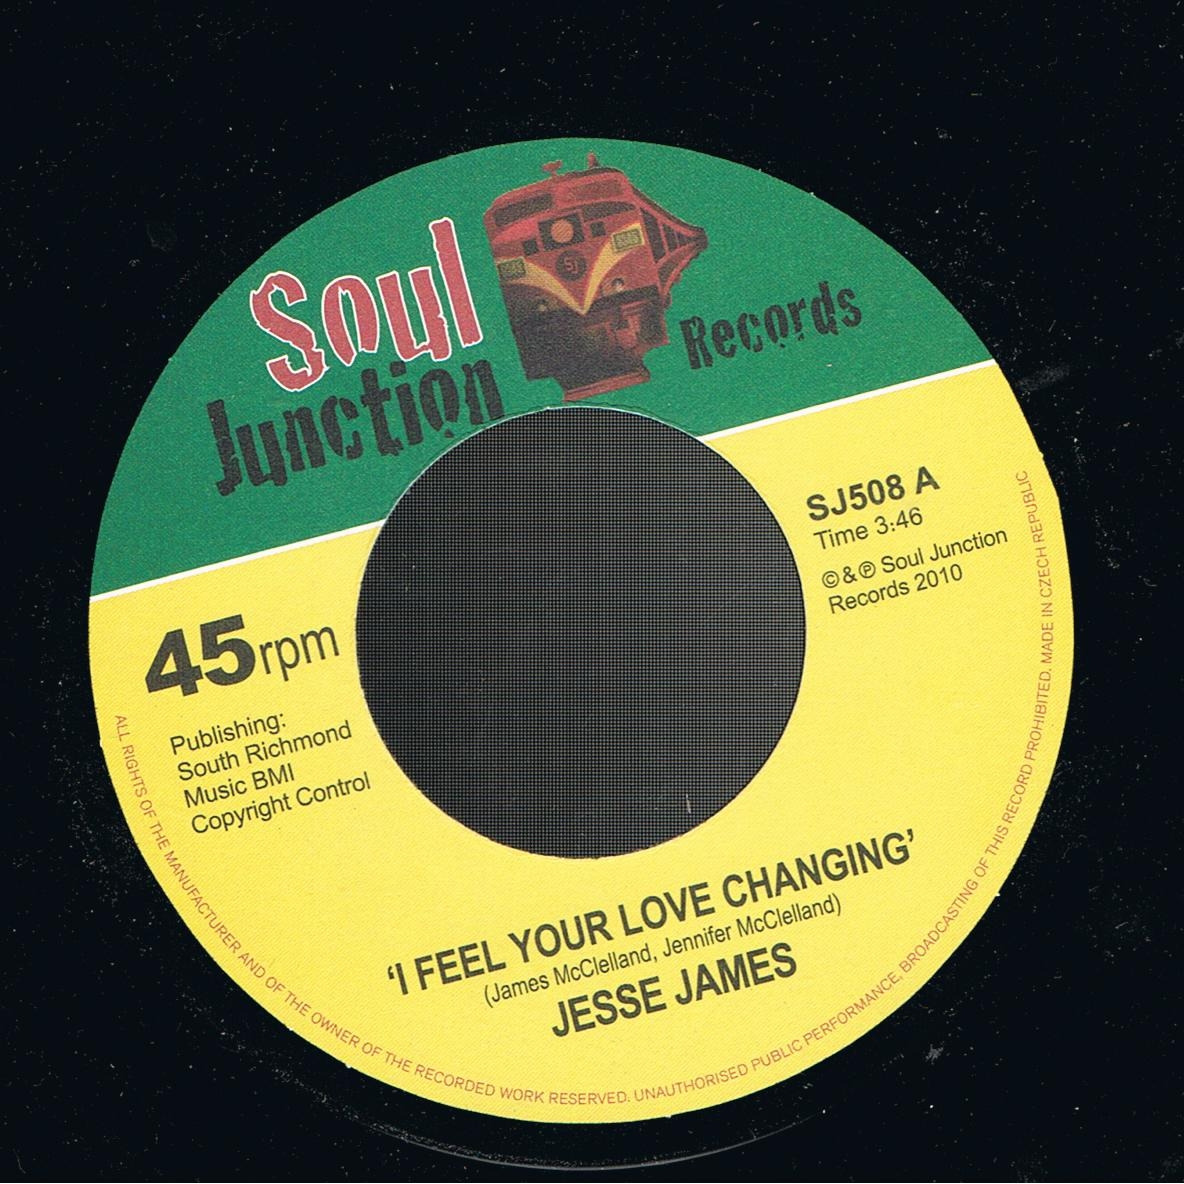 Jesse James - I Feel Your Love Changing / Jesse James - It's Time For Change (7")